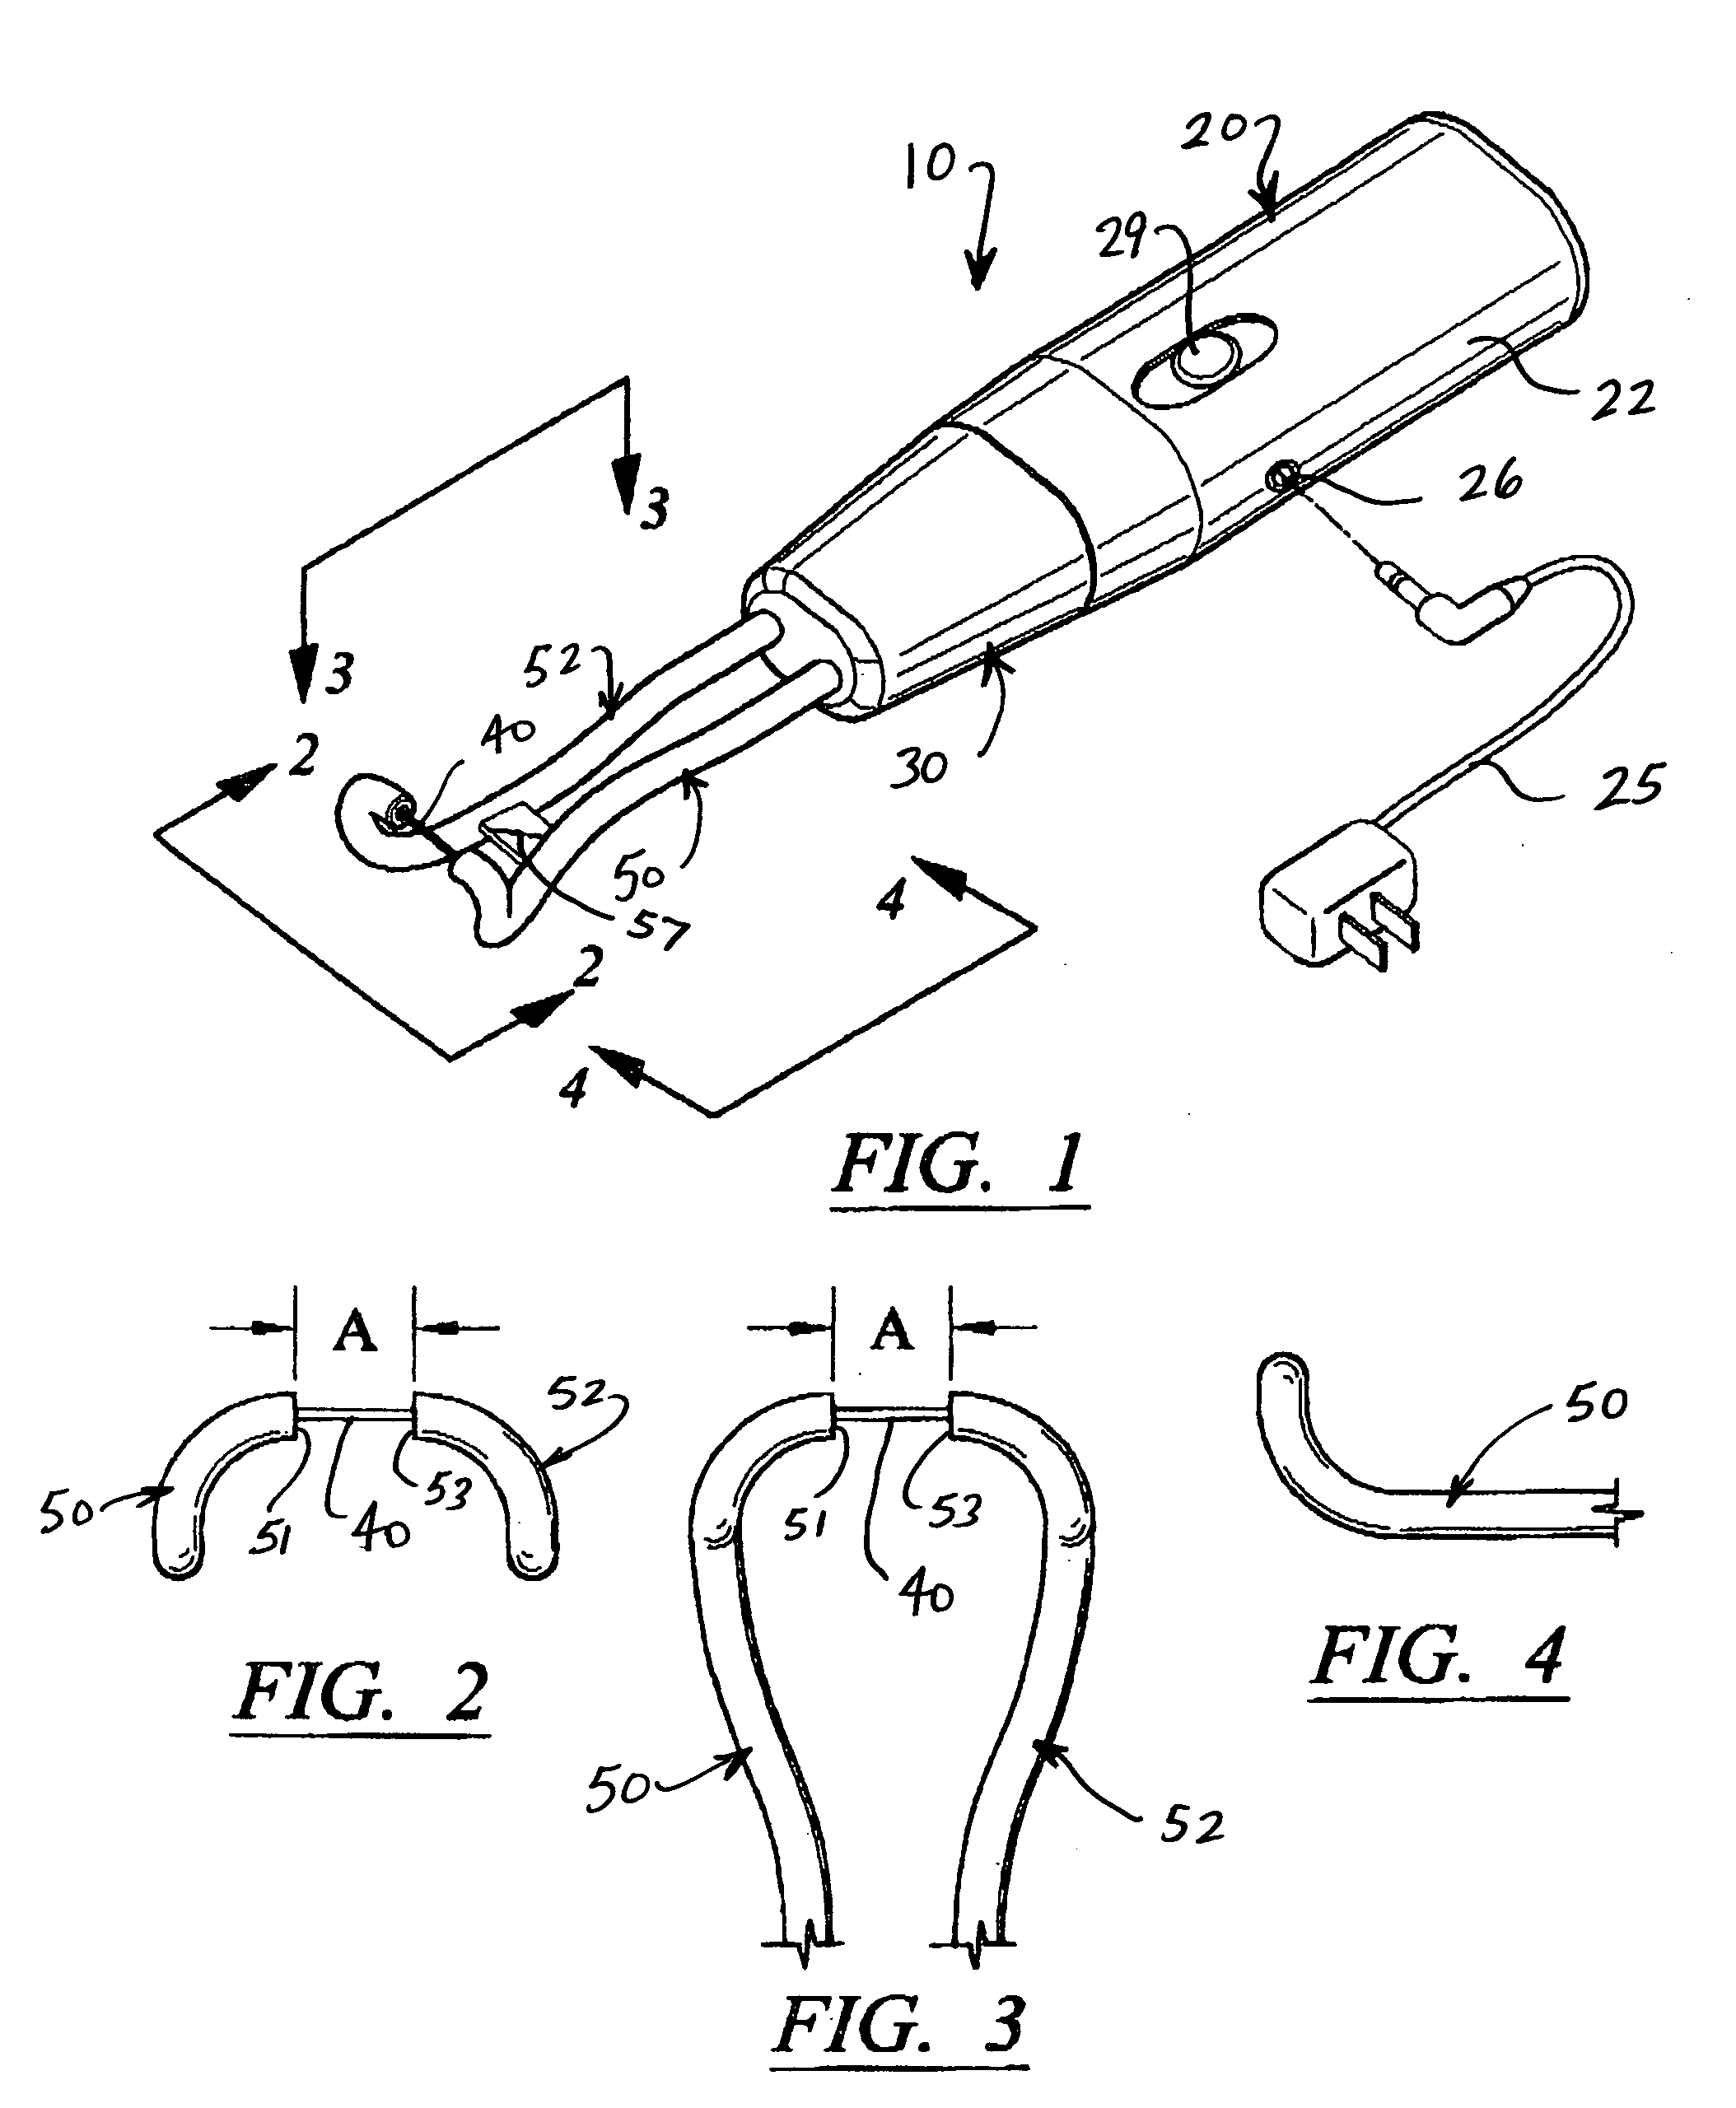 Electrically powered dental flossing device with sanitary and disposable floss containing unit